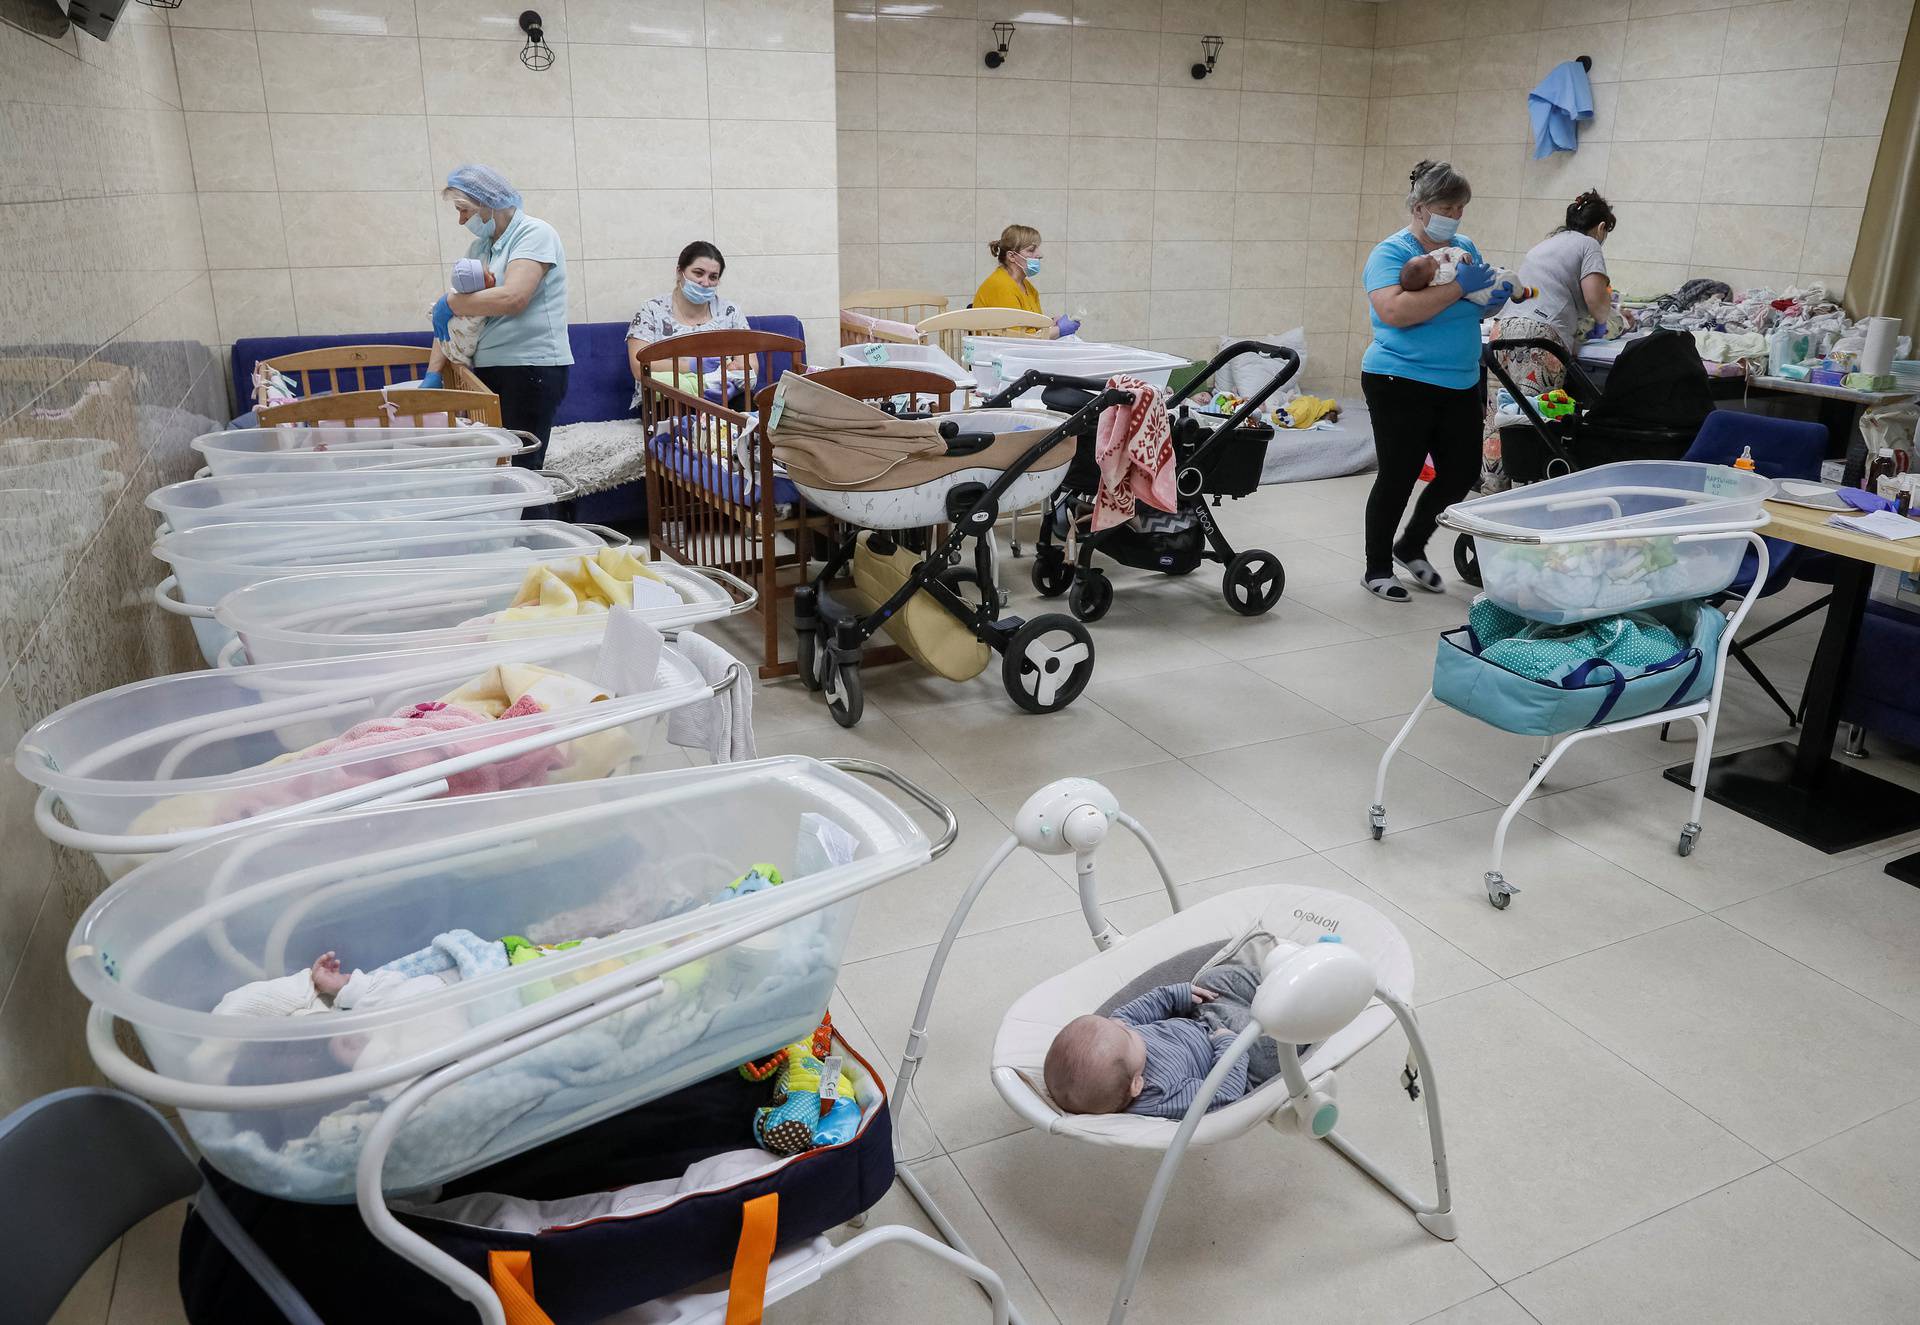 Babies born to surrogate mothers stranded in shelter amid Russia's invasion of Ukraine, in Kyiv